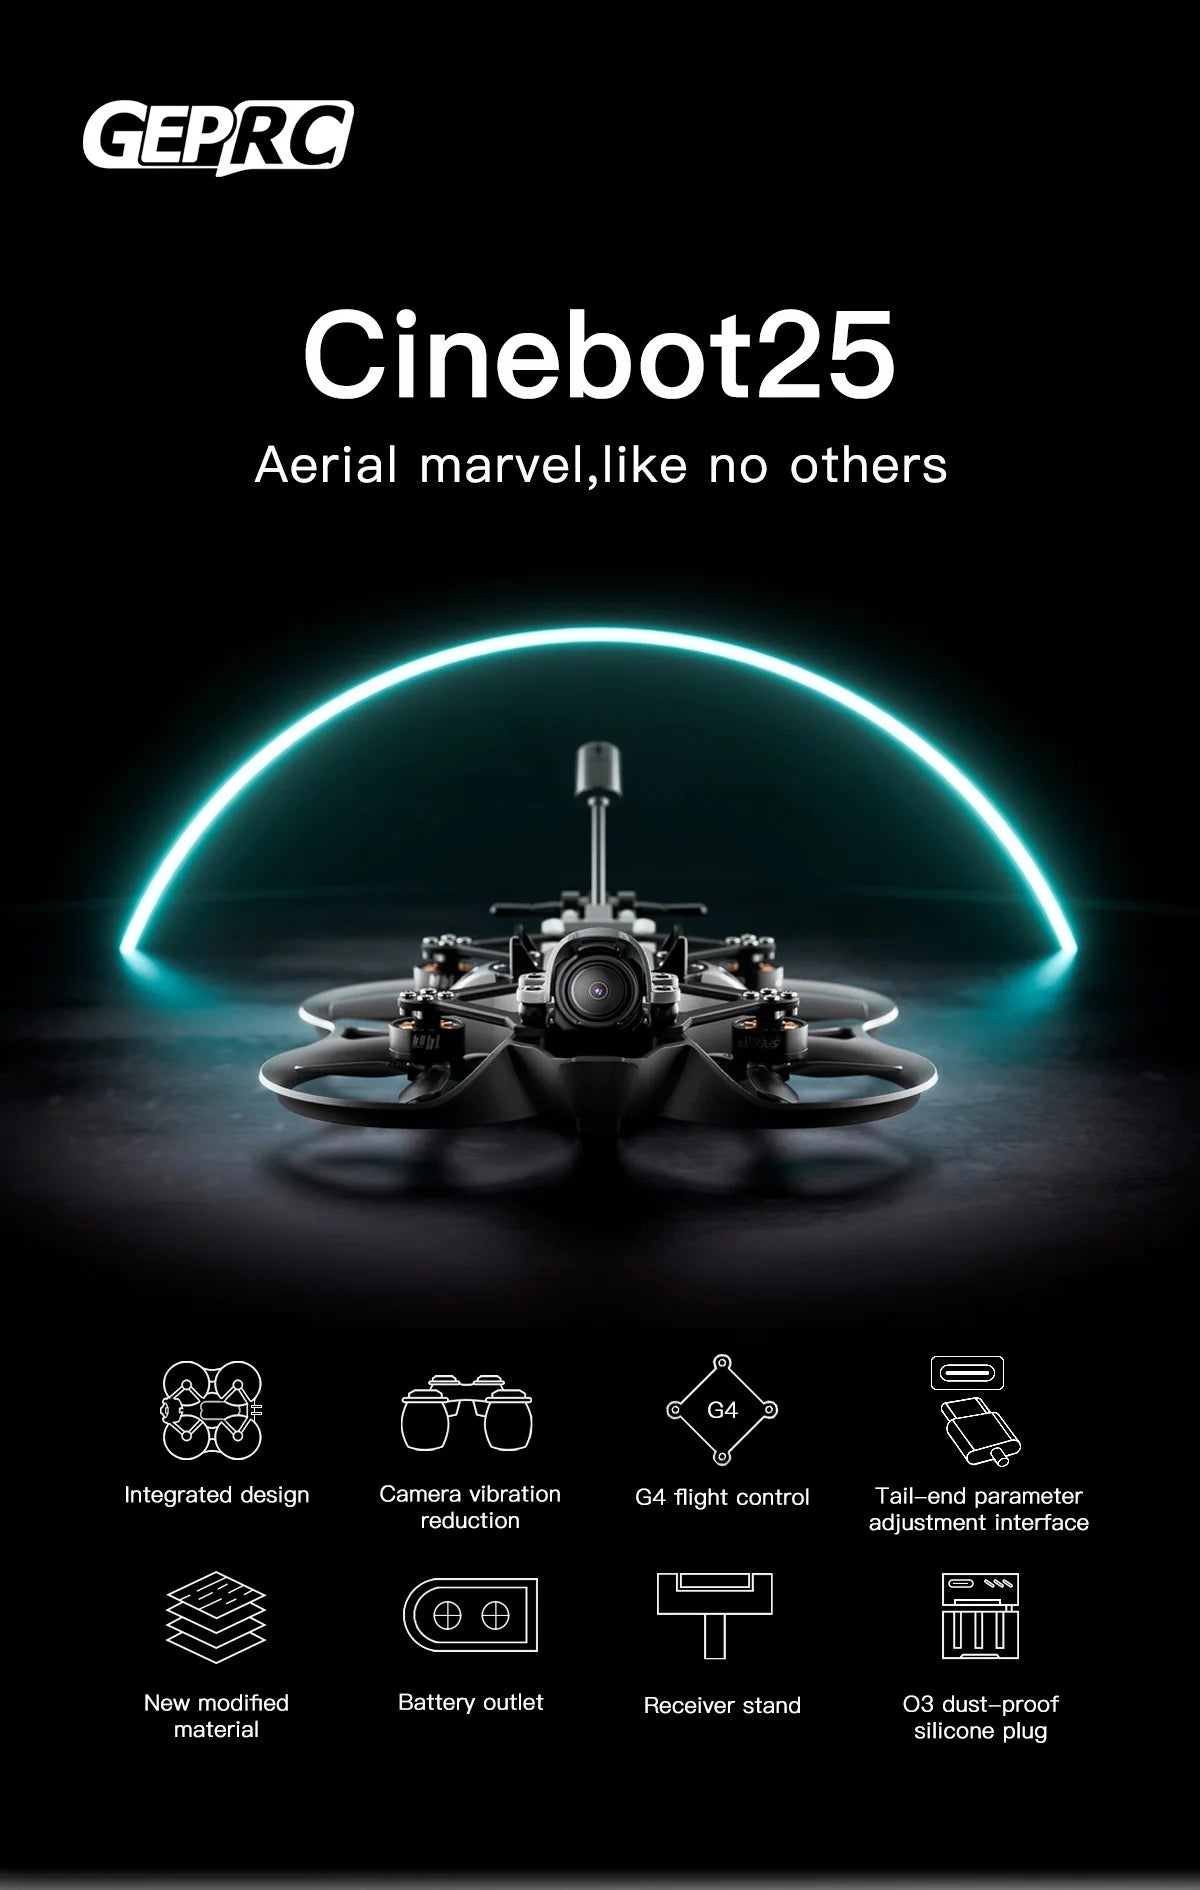 GEPRC Cinebot25 WTFPV FPV Drone, GEPRC Cinebot25 Aerial marvel,like no thers buhl